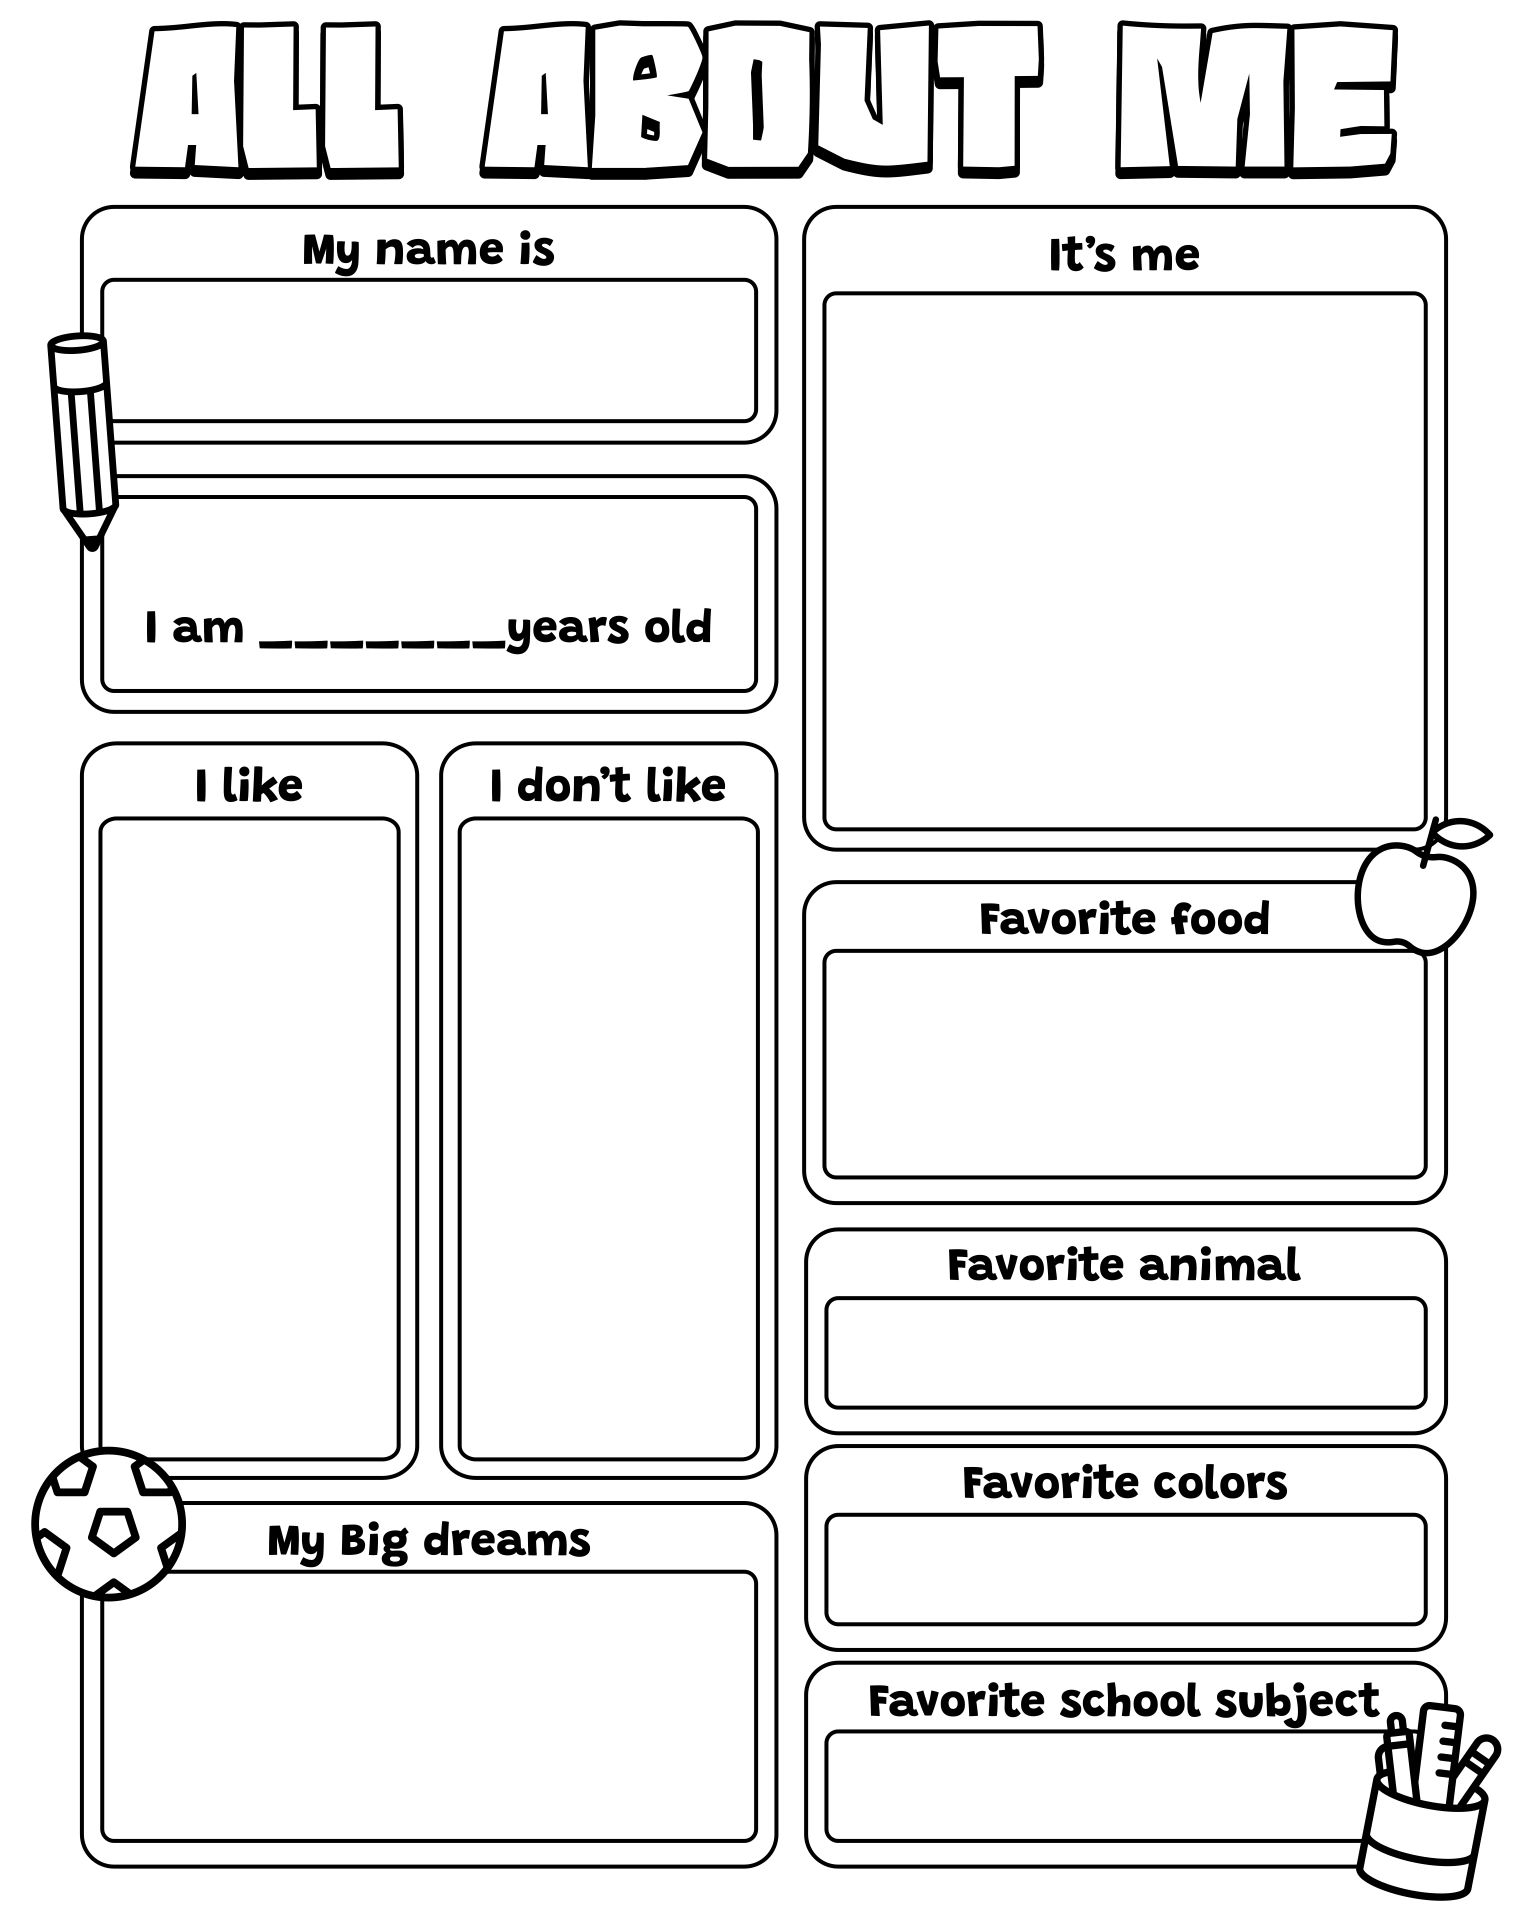 9-best-images-of-about-me-worksheets-printable-all-about-me-worksheets-printables-all-about